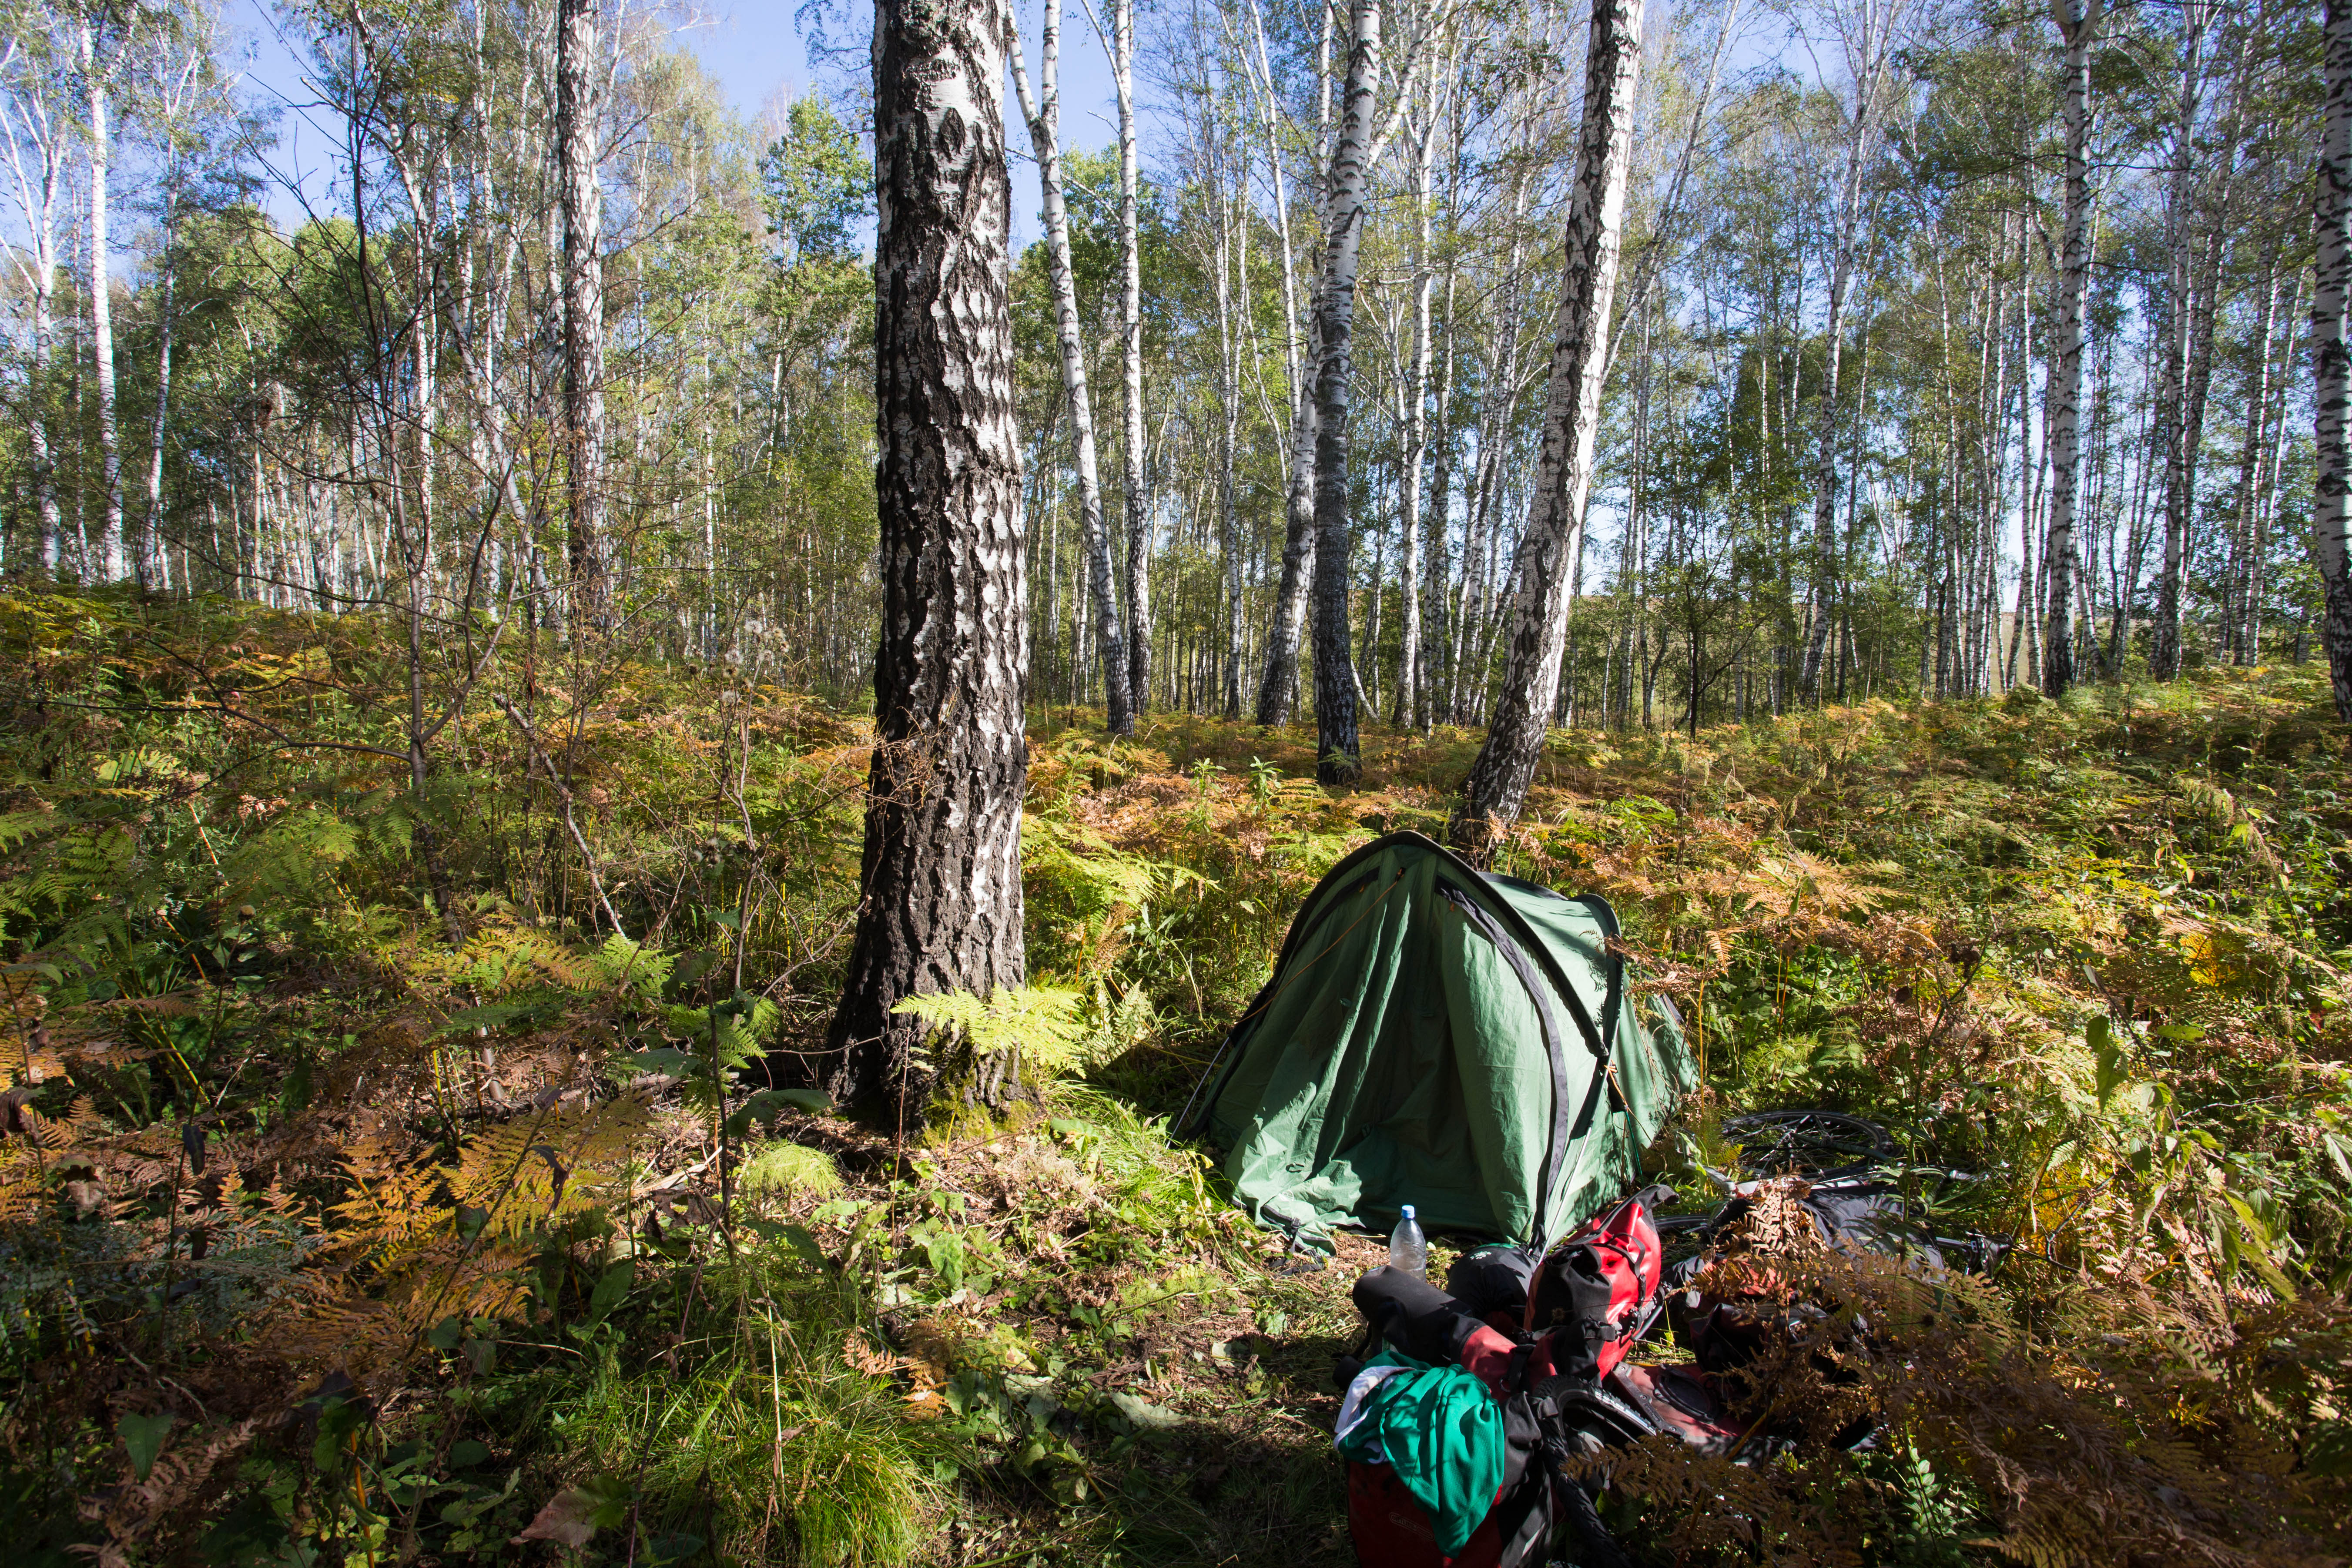 Wild camping amongst the dense foliage of the Altai